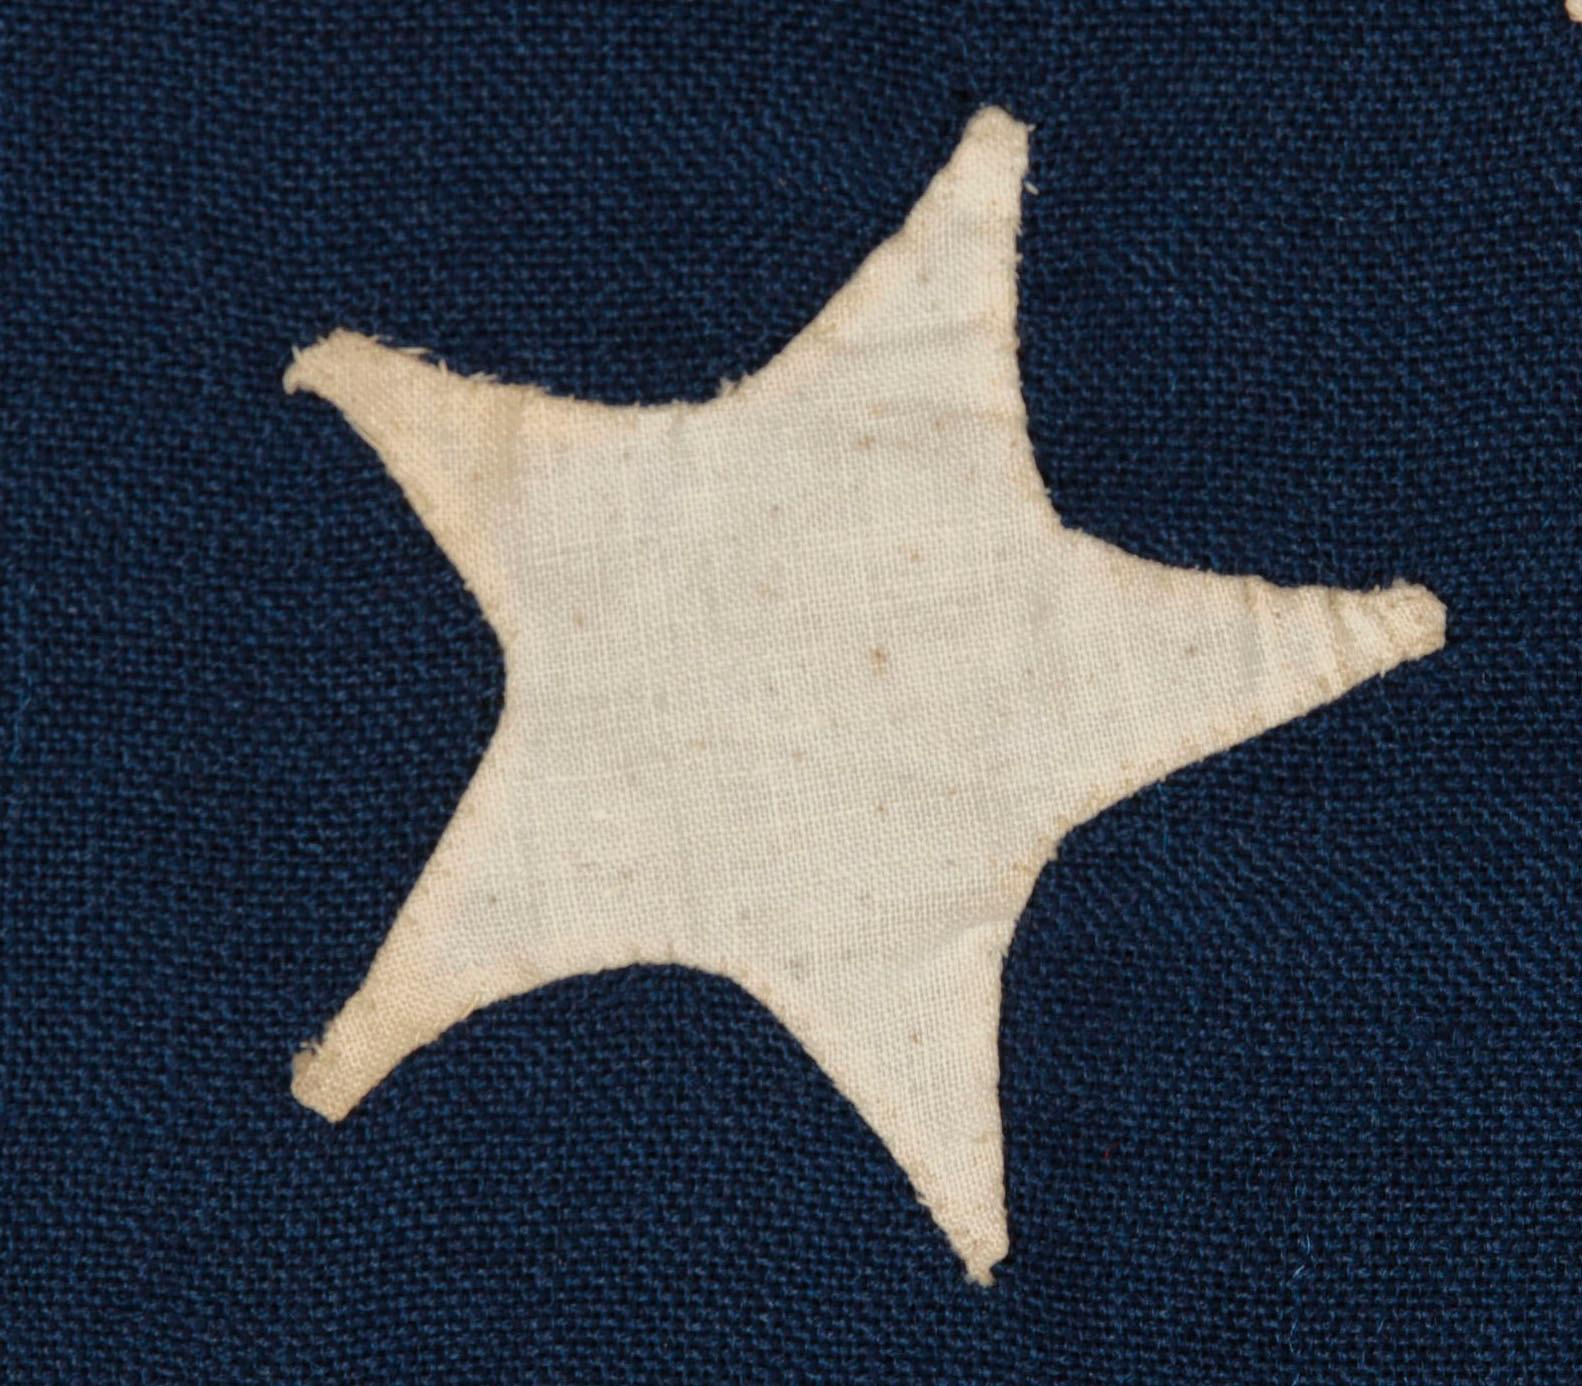 Wool 13 Stars in the Circular Wreath Pattern Often Attributed to Betsy Ross